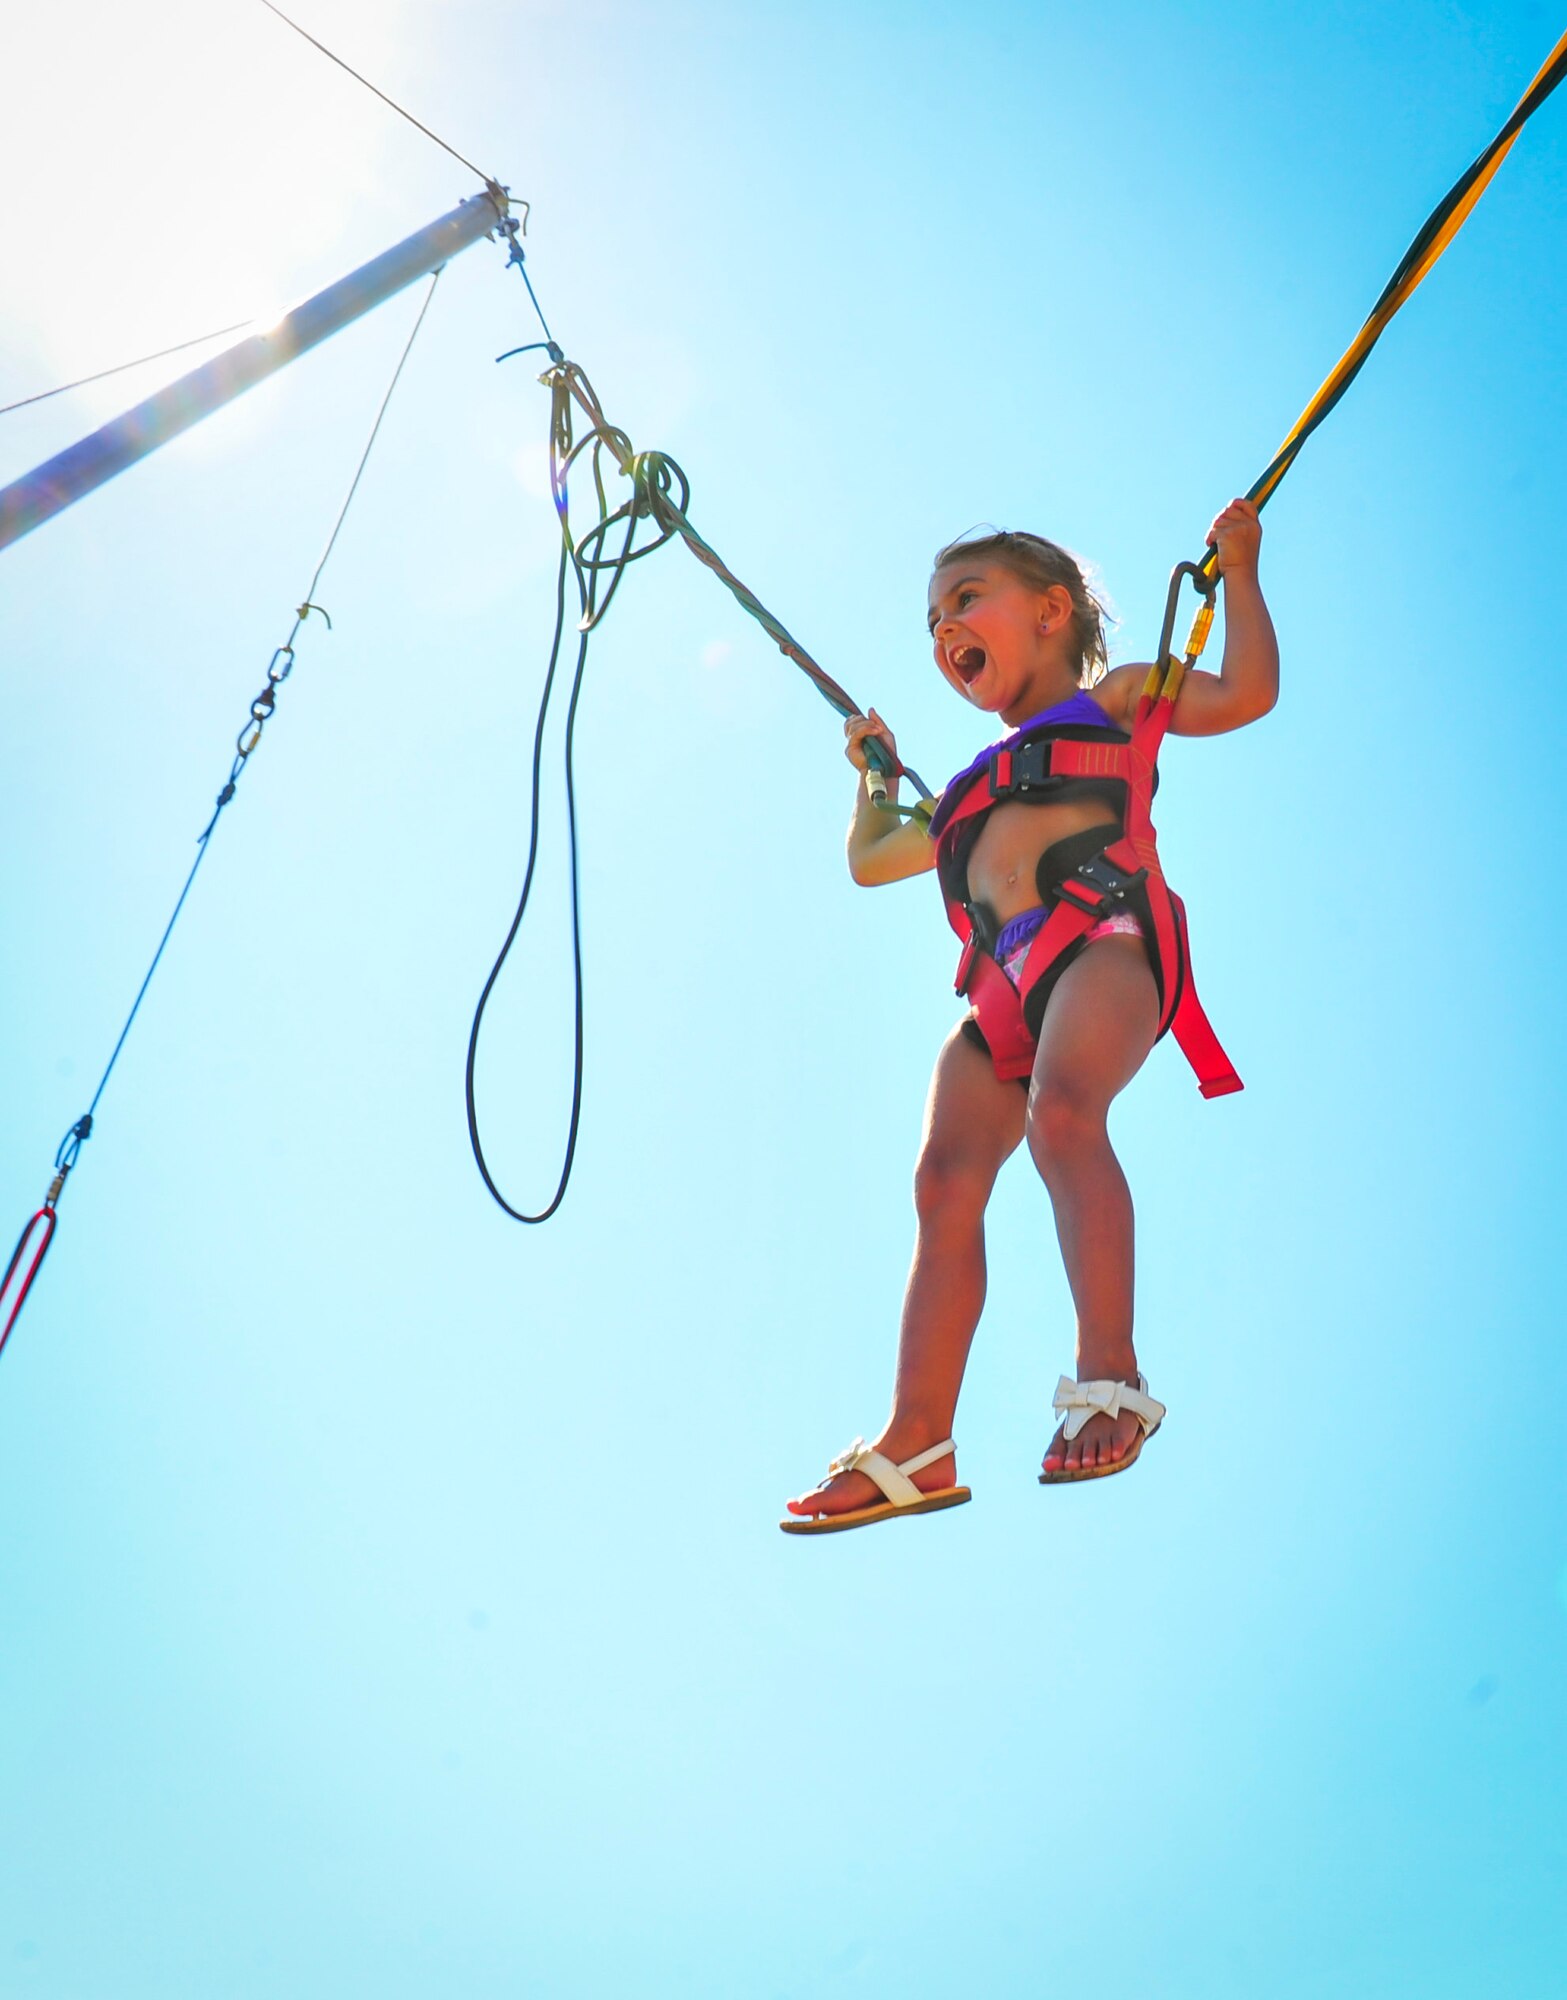 A child laughs as she enjoys a bungee trampoline attraction during the Sound of Independence at Hurlburt Field, Fla., June 24, 2016. The bungee trampoline is one of many attractions offered at the Sound of Independence. Other attractions included a zip line and inflatable water slides (U.S. Air Force photo by Airman Dennis Spain)